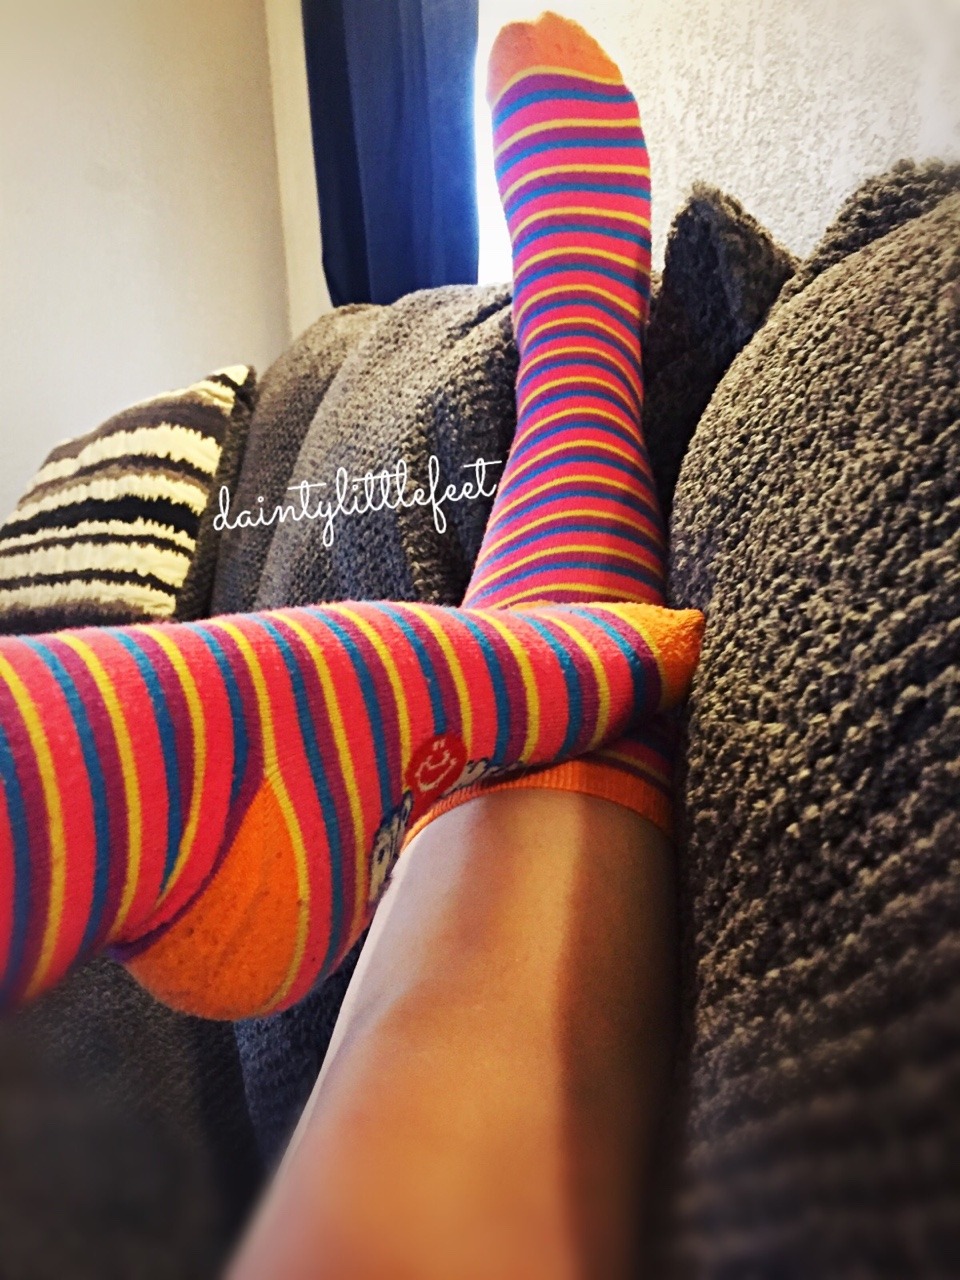 daintylittlefeet-my-feet-are-so-cold-today-but-i-ll-take-my-socks